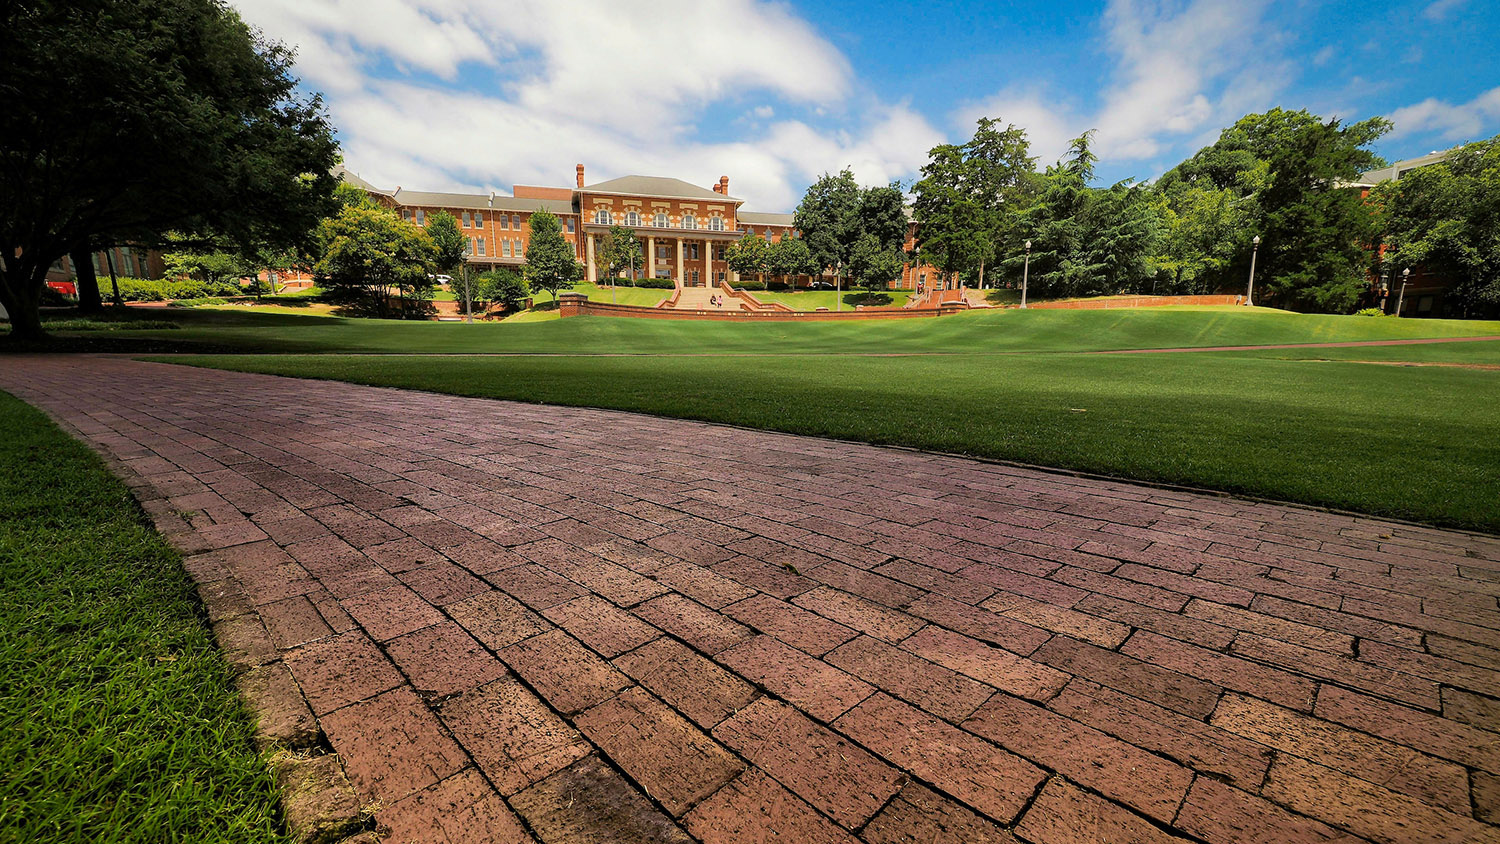 Close-up of brick path with the Court of Carolina in the background